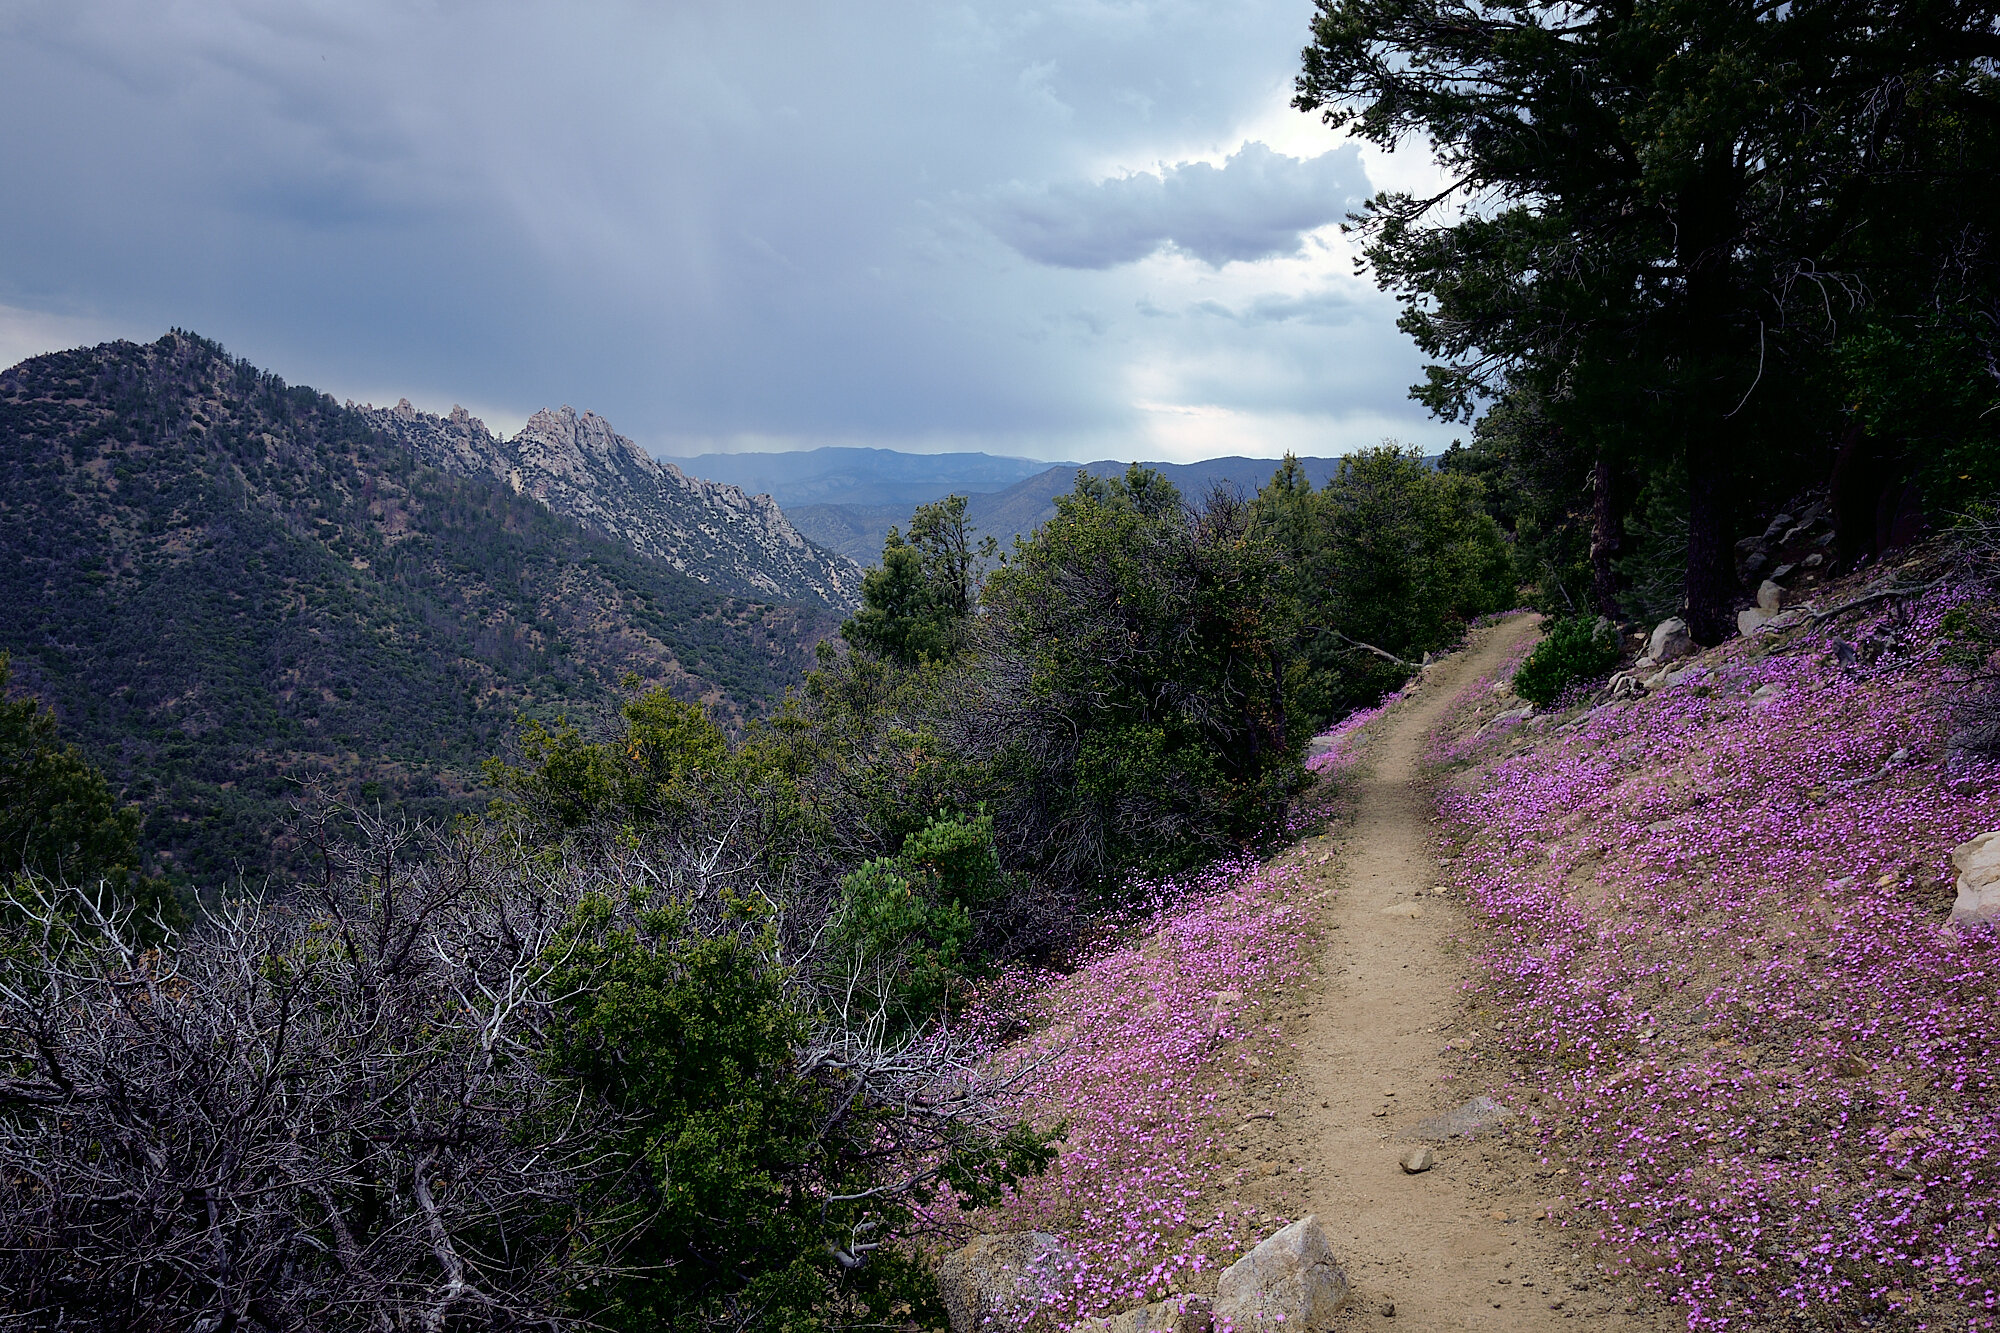  Wildflowers along the trail as a storm rolls in. | 6/17/19 Mile 676.2, 6,899' 